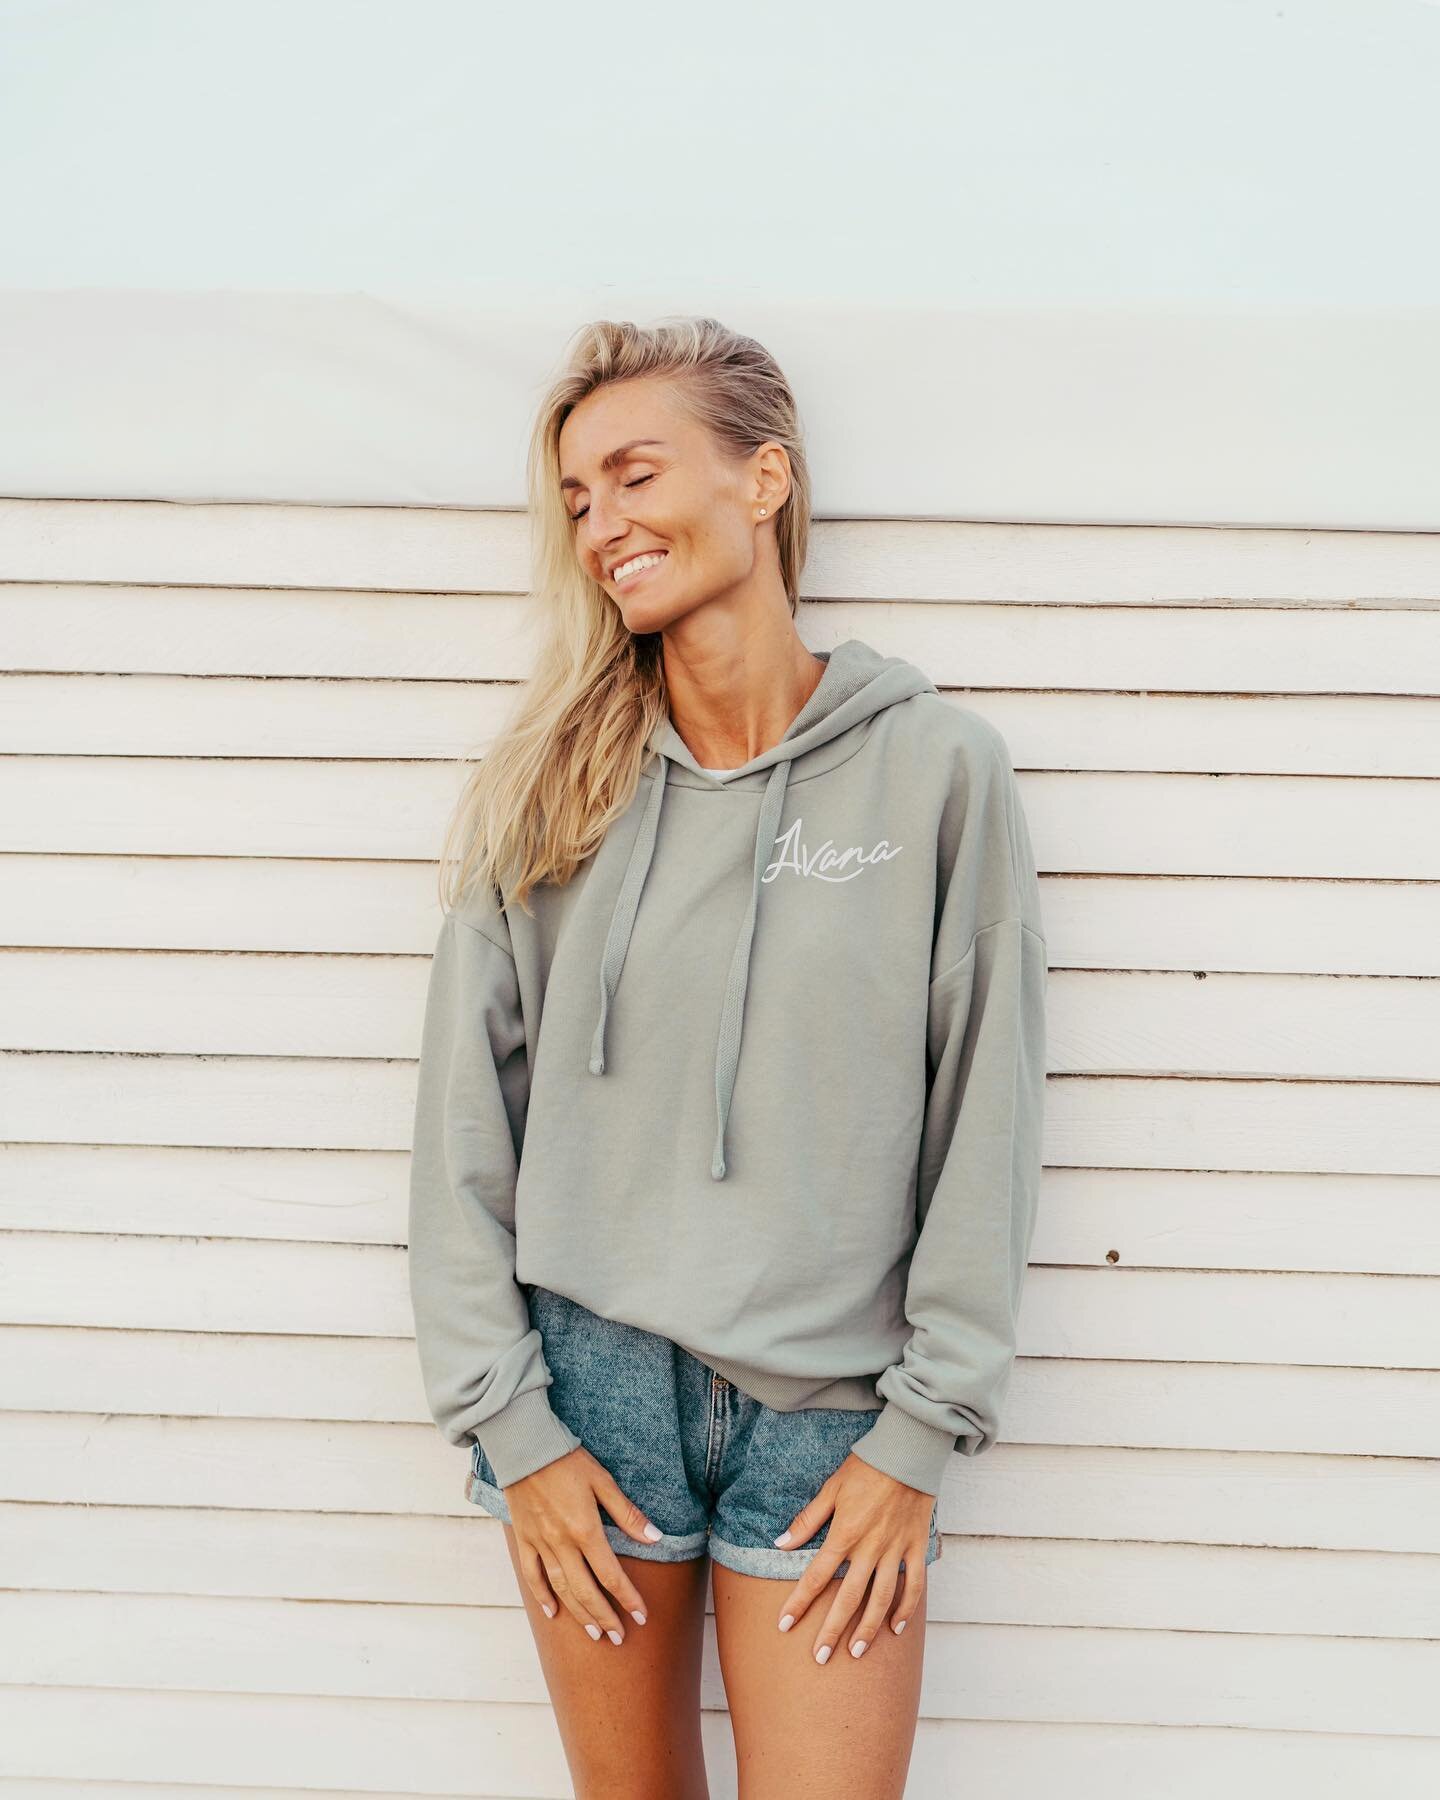 ✨GIVEAWAY✨ 

No better way to celebrate National Tequila Day than the GIVEAWAY of your Avana dreams! ⚡️

The lucky winner will receive a $150 Avana gift card&nbsp;+ a custom Avana hoodie made just for you! 🥳 

To Enter:
1. Like this post 
2. Follow 